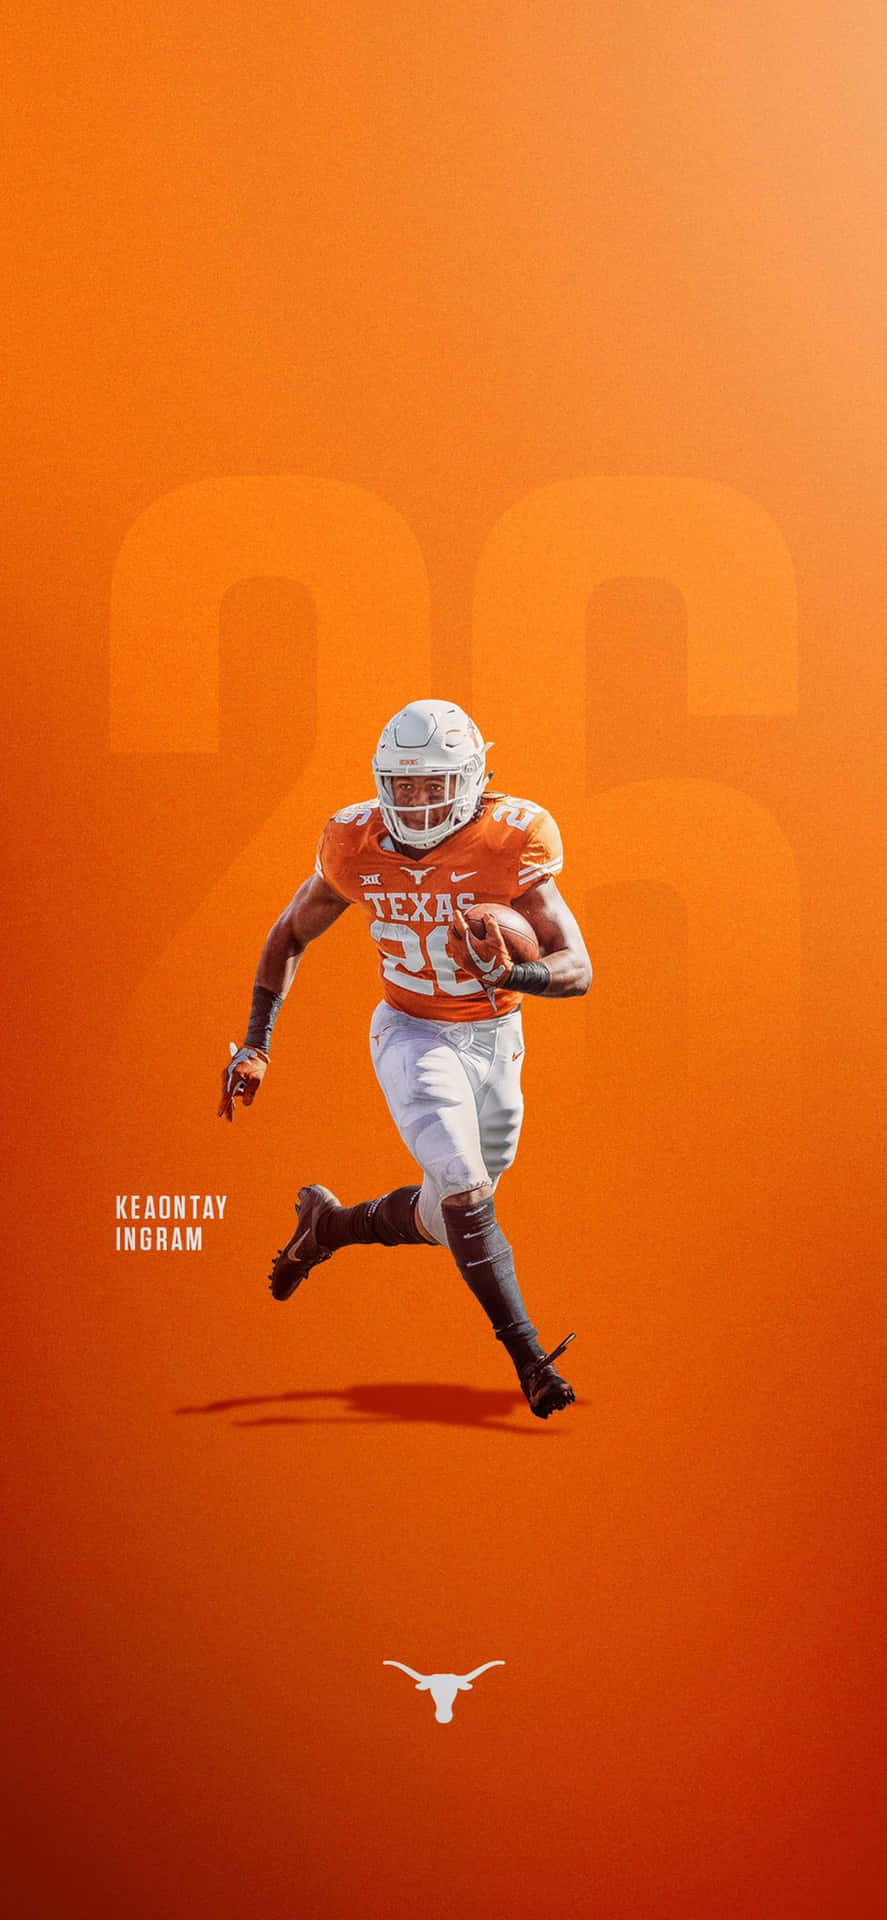 A Football Player Is Running On An Orange Background Wallpaper